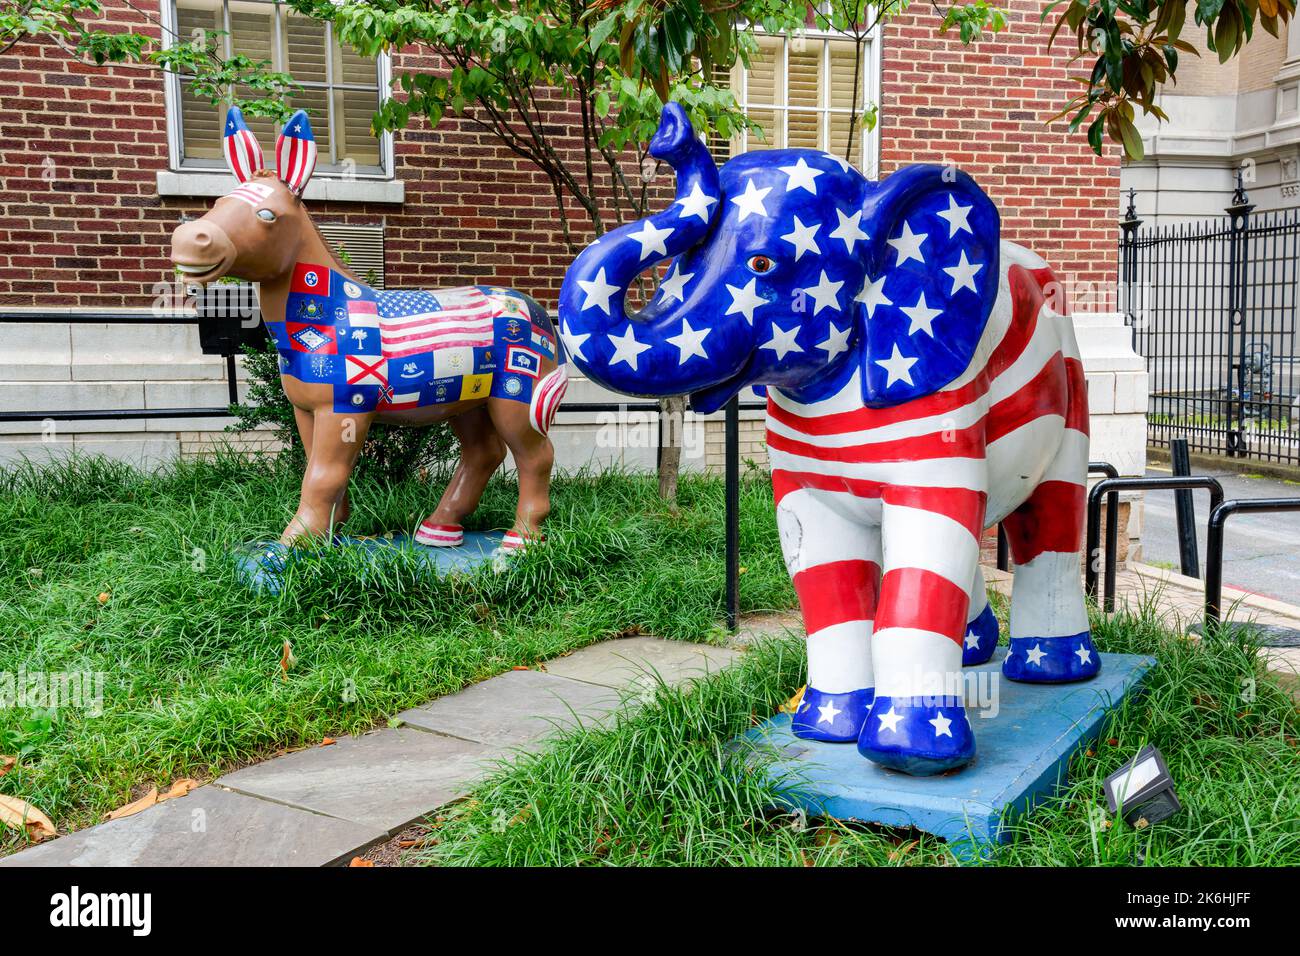 Washington, DC - June 27, 2022: 'A Party for All' (Donkey) by Cory Lynn Caulfield and 'Grand Old Pachyderm' (Elephant) by Gary Jameson are from the 20 Stock Photo